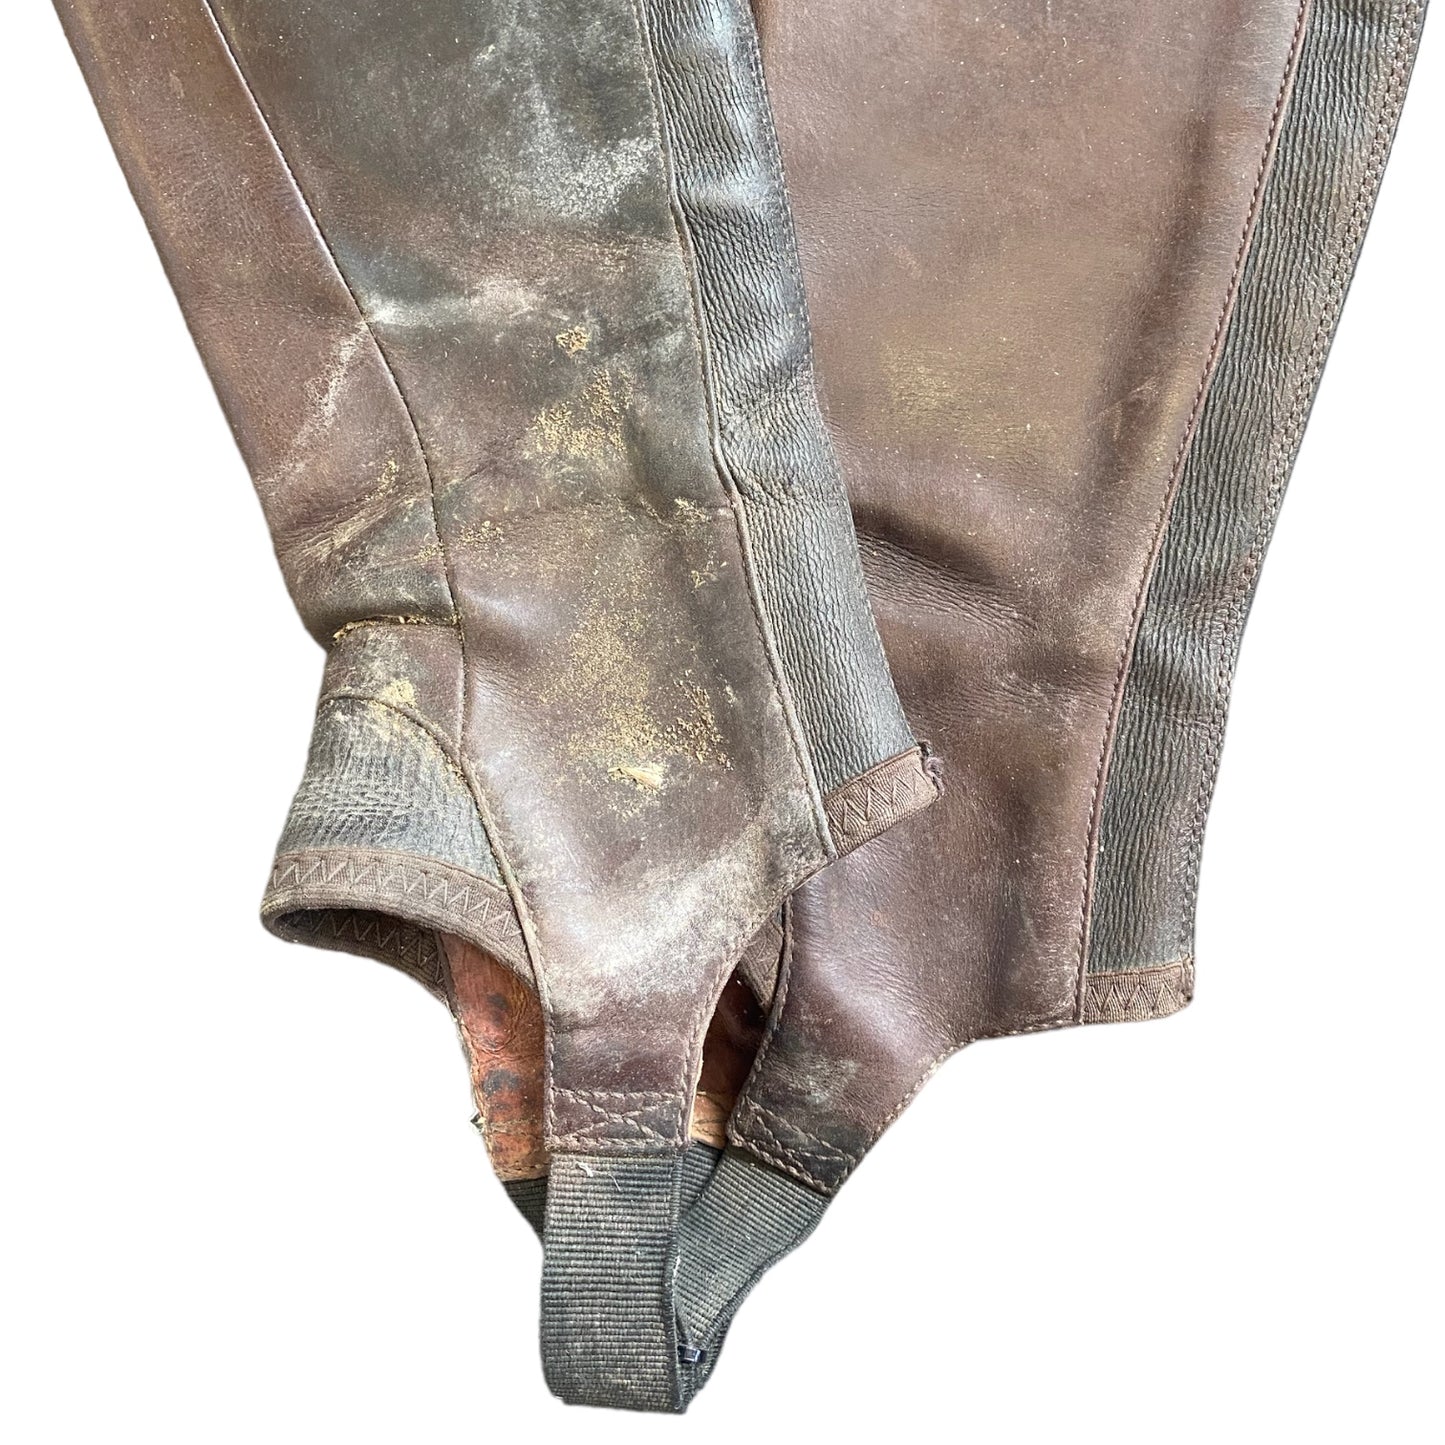 Secondhand Ariat Half Chaps ADULTS XXS Brown (234526)